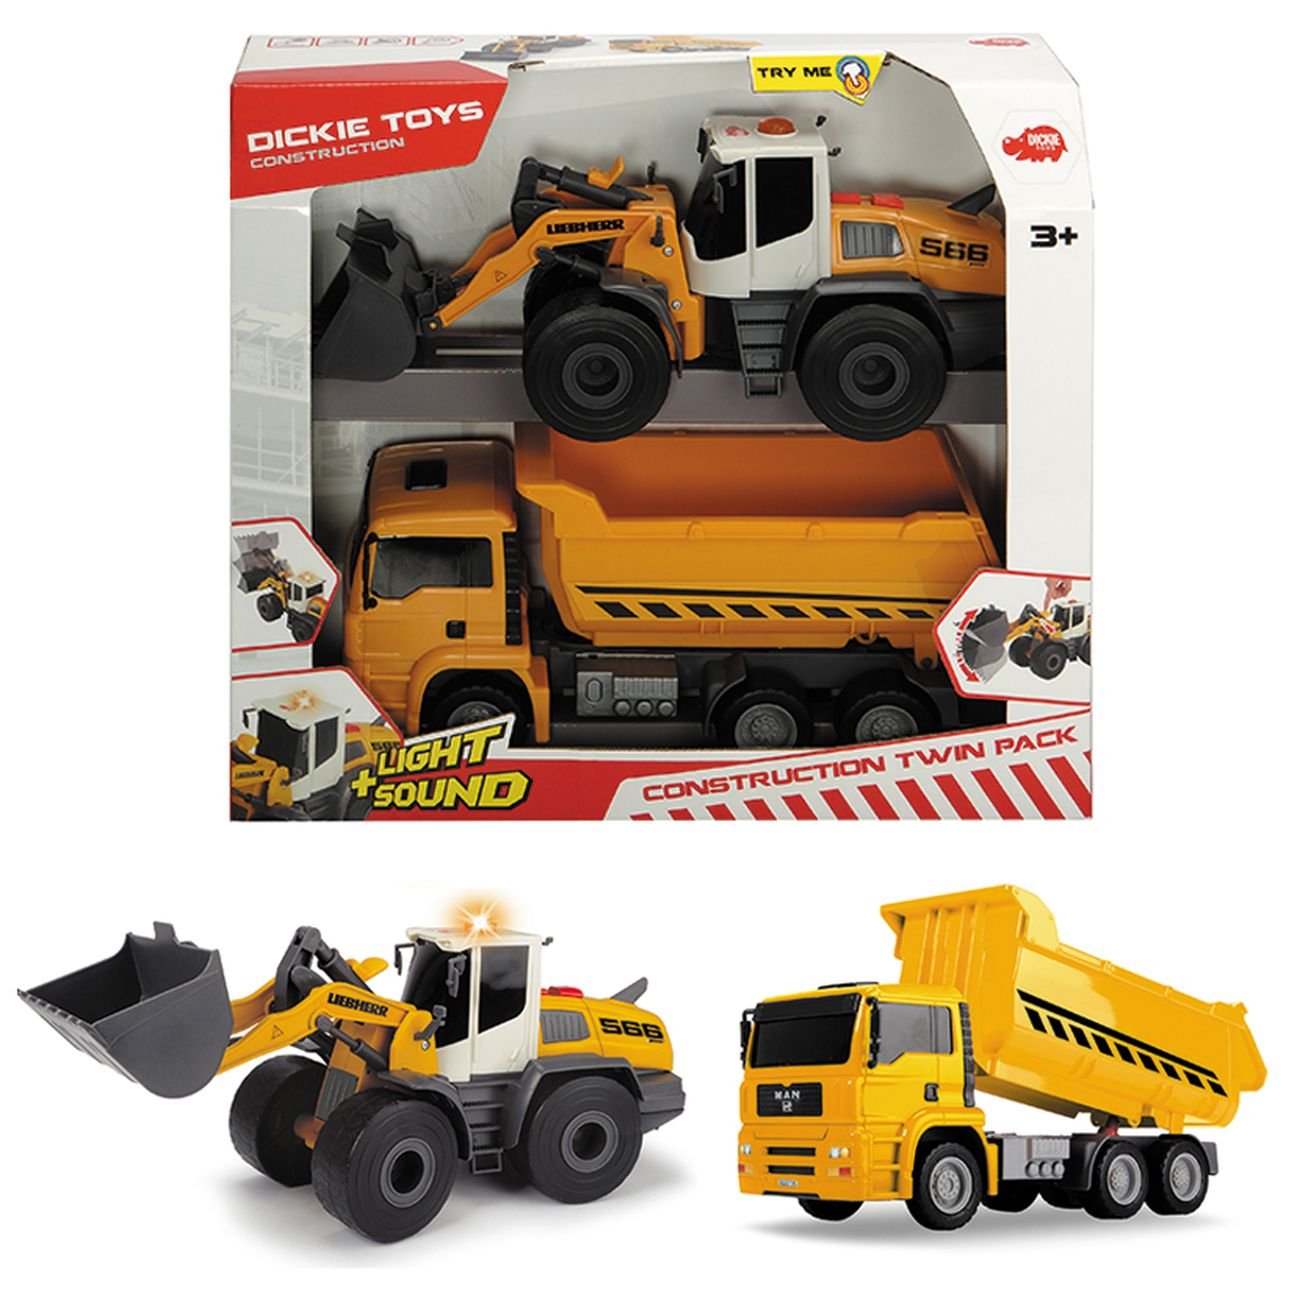 DICKIE CONSTRUCTION TWIN PACK